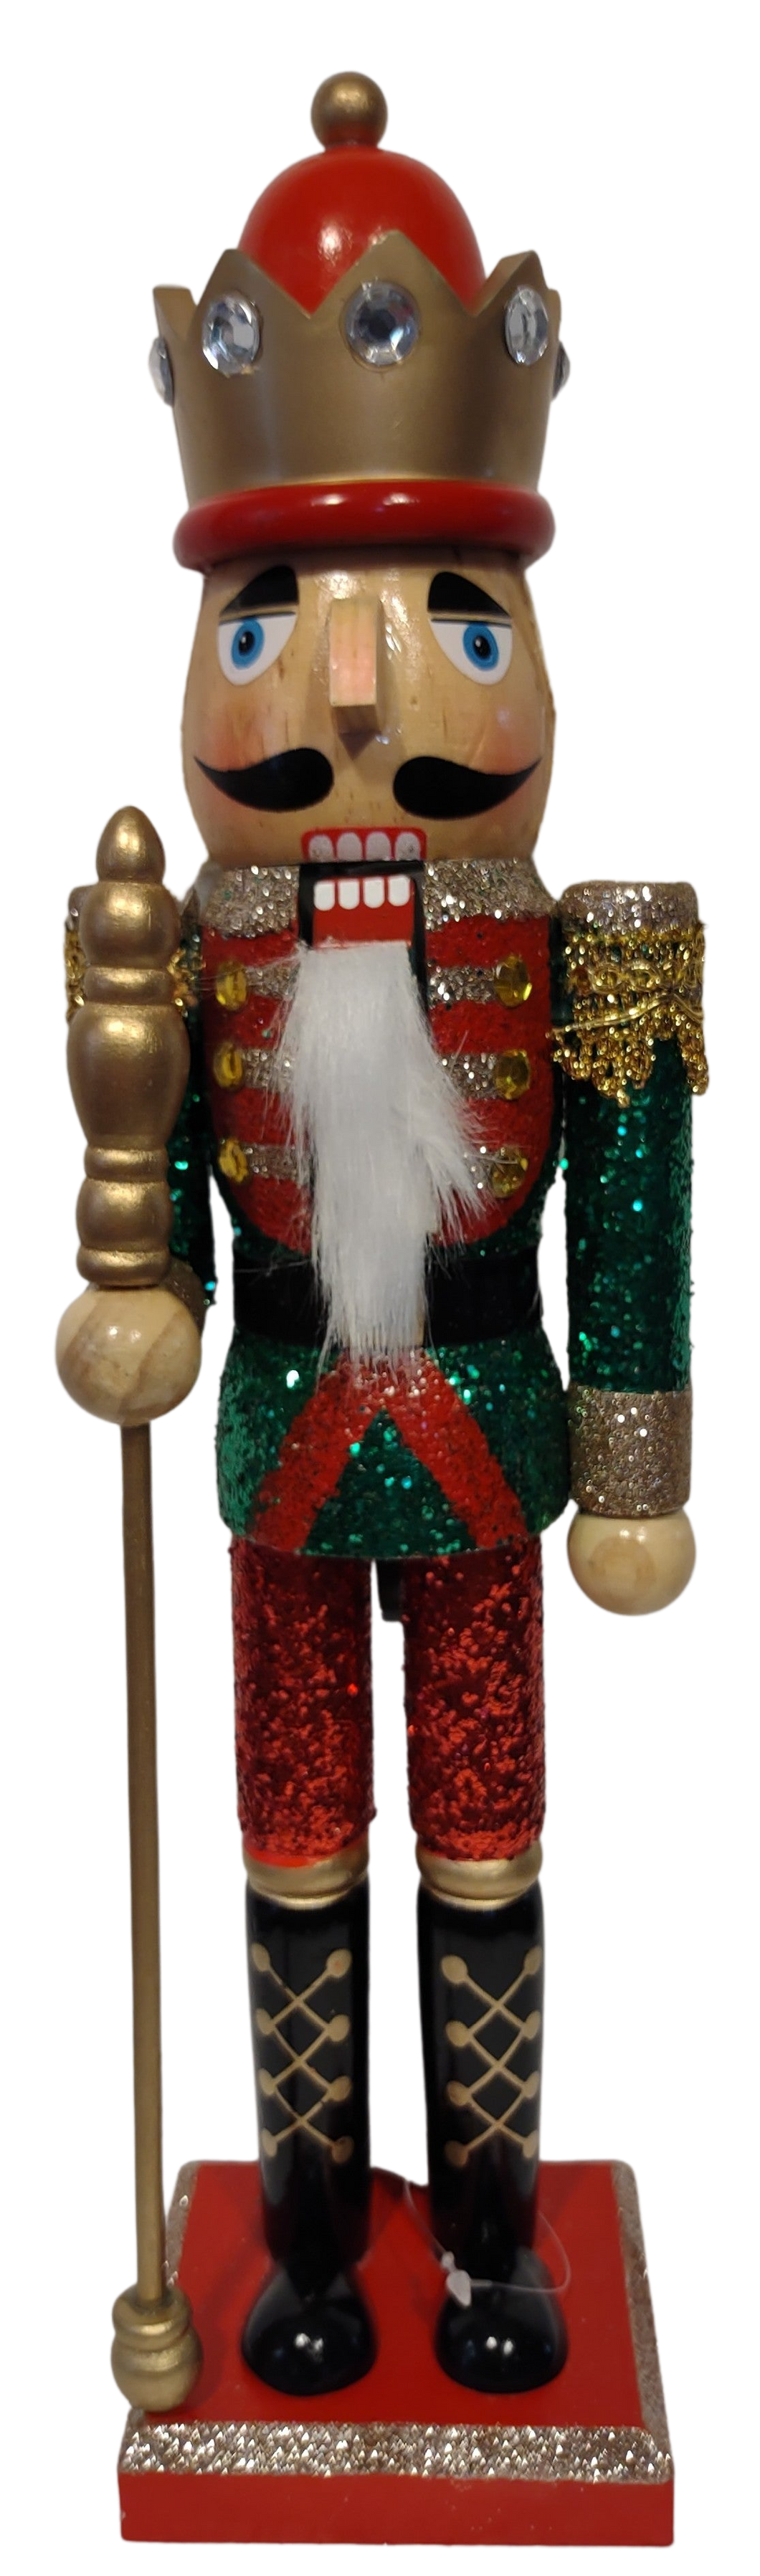 Wooden Glitz Nutcracker Red/Green/Gold with Red/Gold Crown & Scepter & Glitter 15